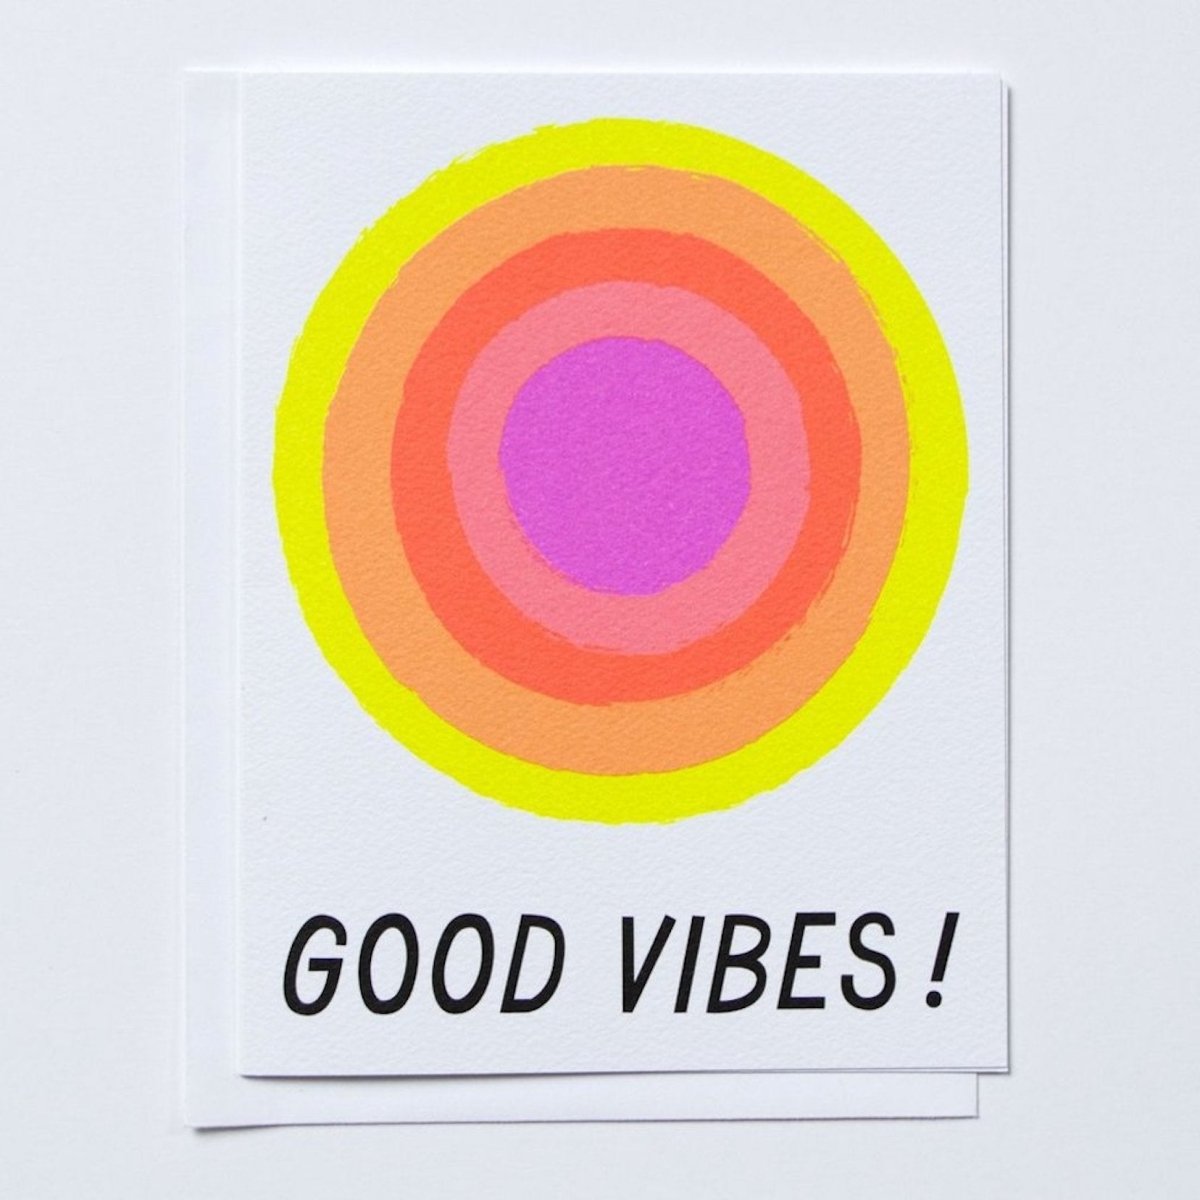 White card with circular layers of neon yellow, orange, pink and purple. Bottom of card reads: "GOOD VIBES!" in black text. Made with recycled paper by Banquet Atelier in Vancouver, British Columbia, Canada.